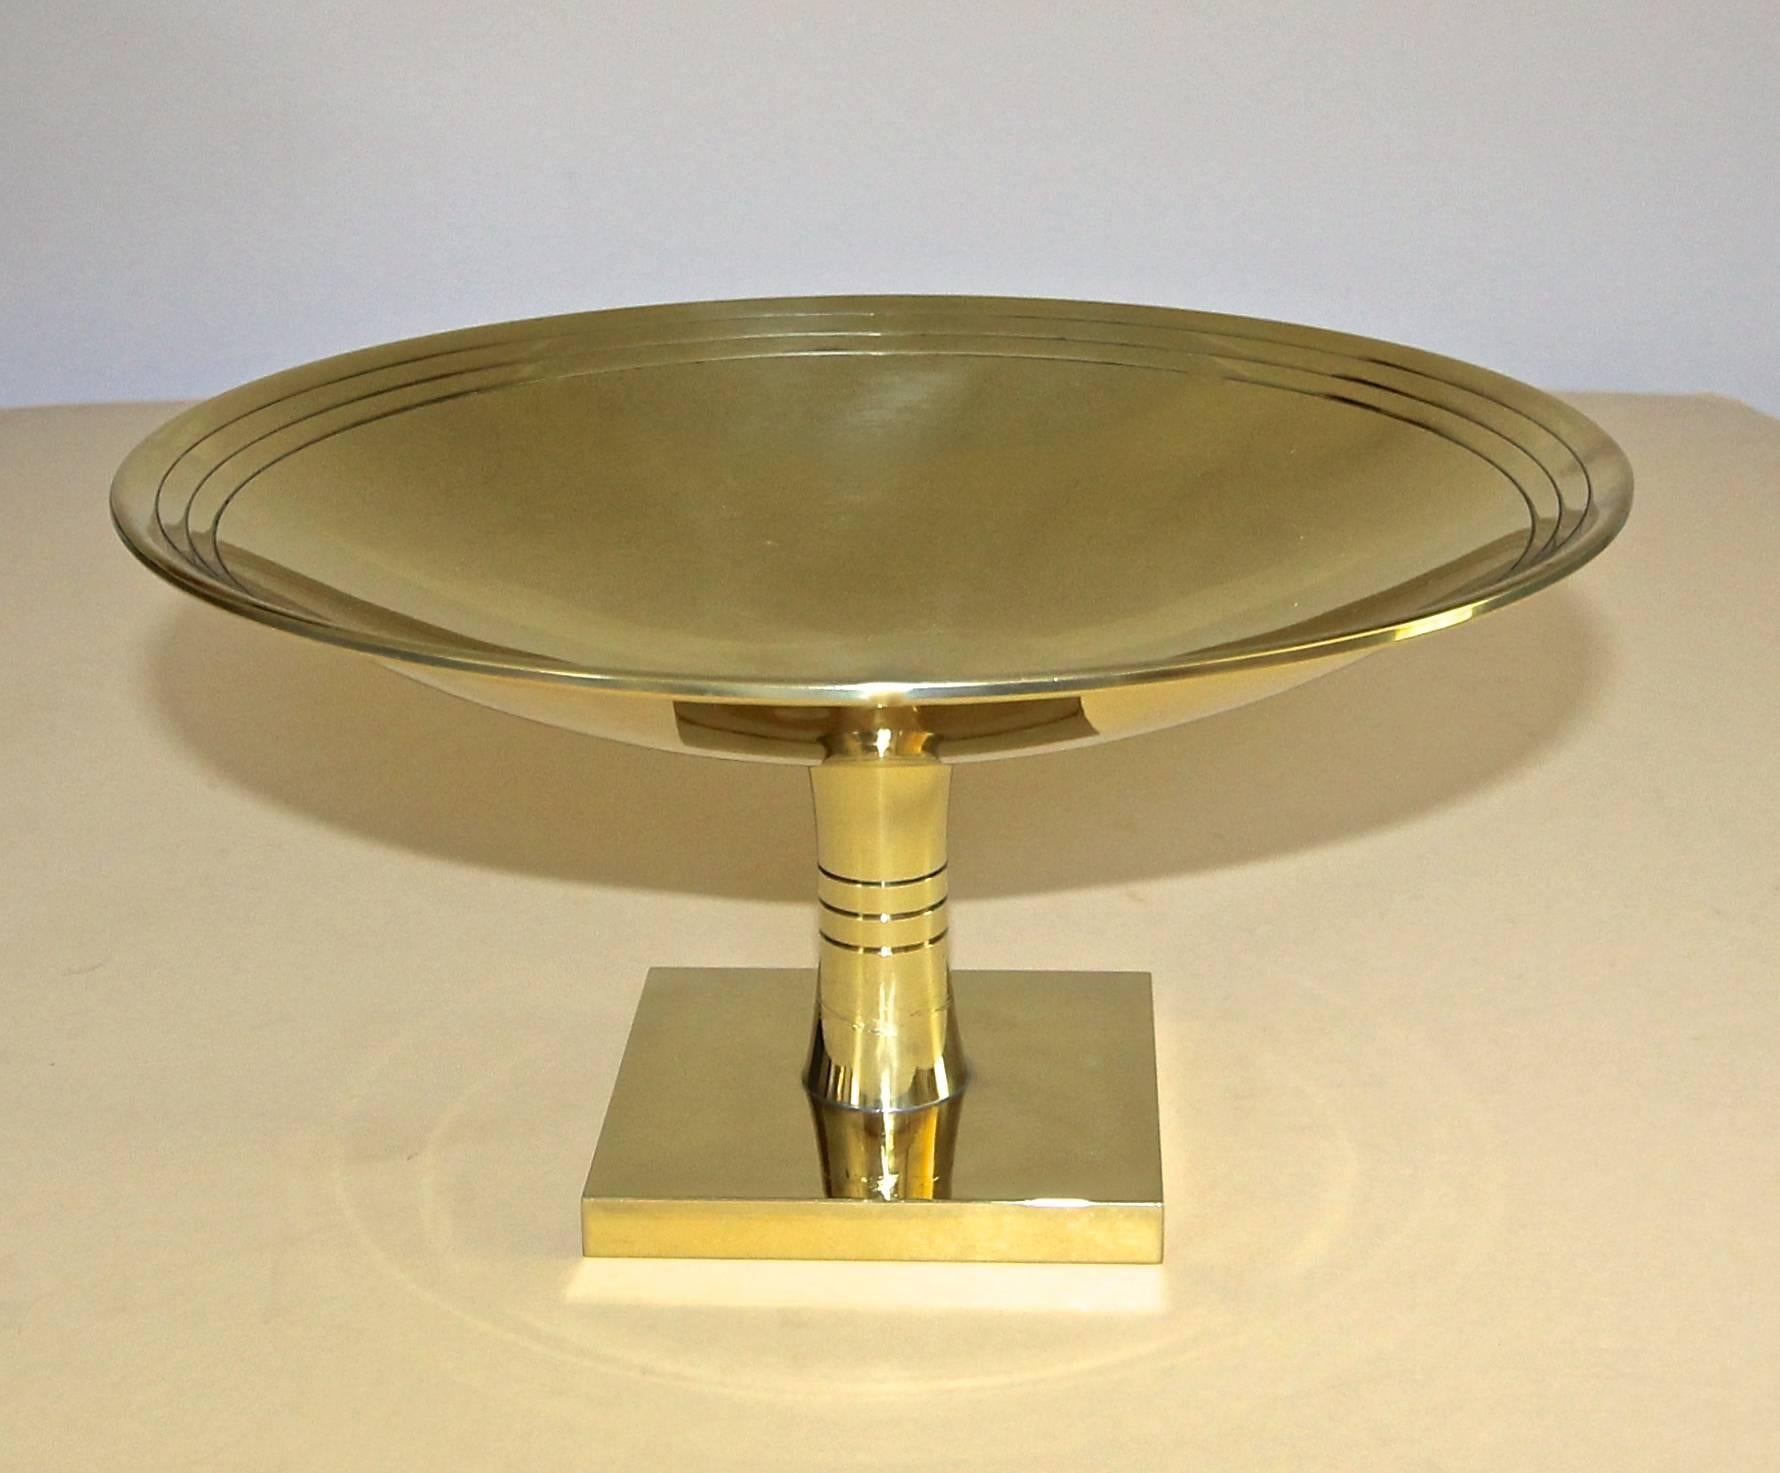 Large round footed brass compote by Tommi Parzinger for by Vincent Lippe / Dorlyn Silversmiths, New York. Each element of the Dorlyn accessories was hand crafted from sheet brass in New York. Stamped Dorlyn Silversmiths. The compote has been more